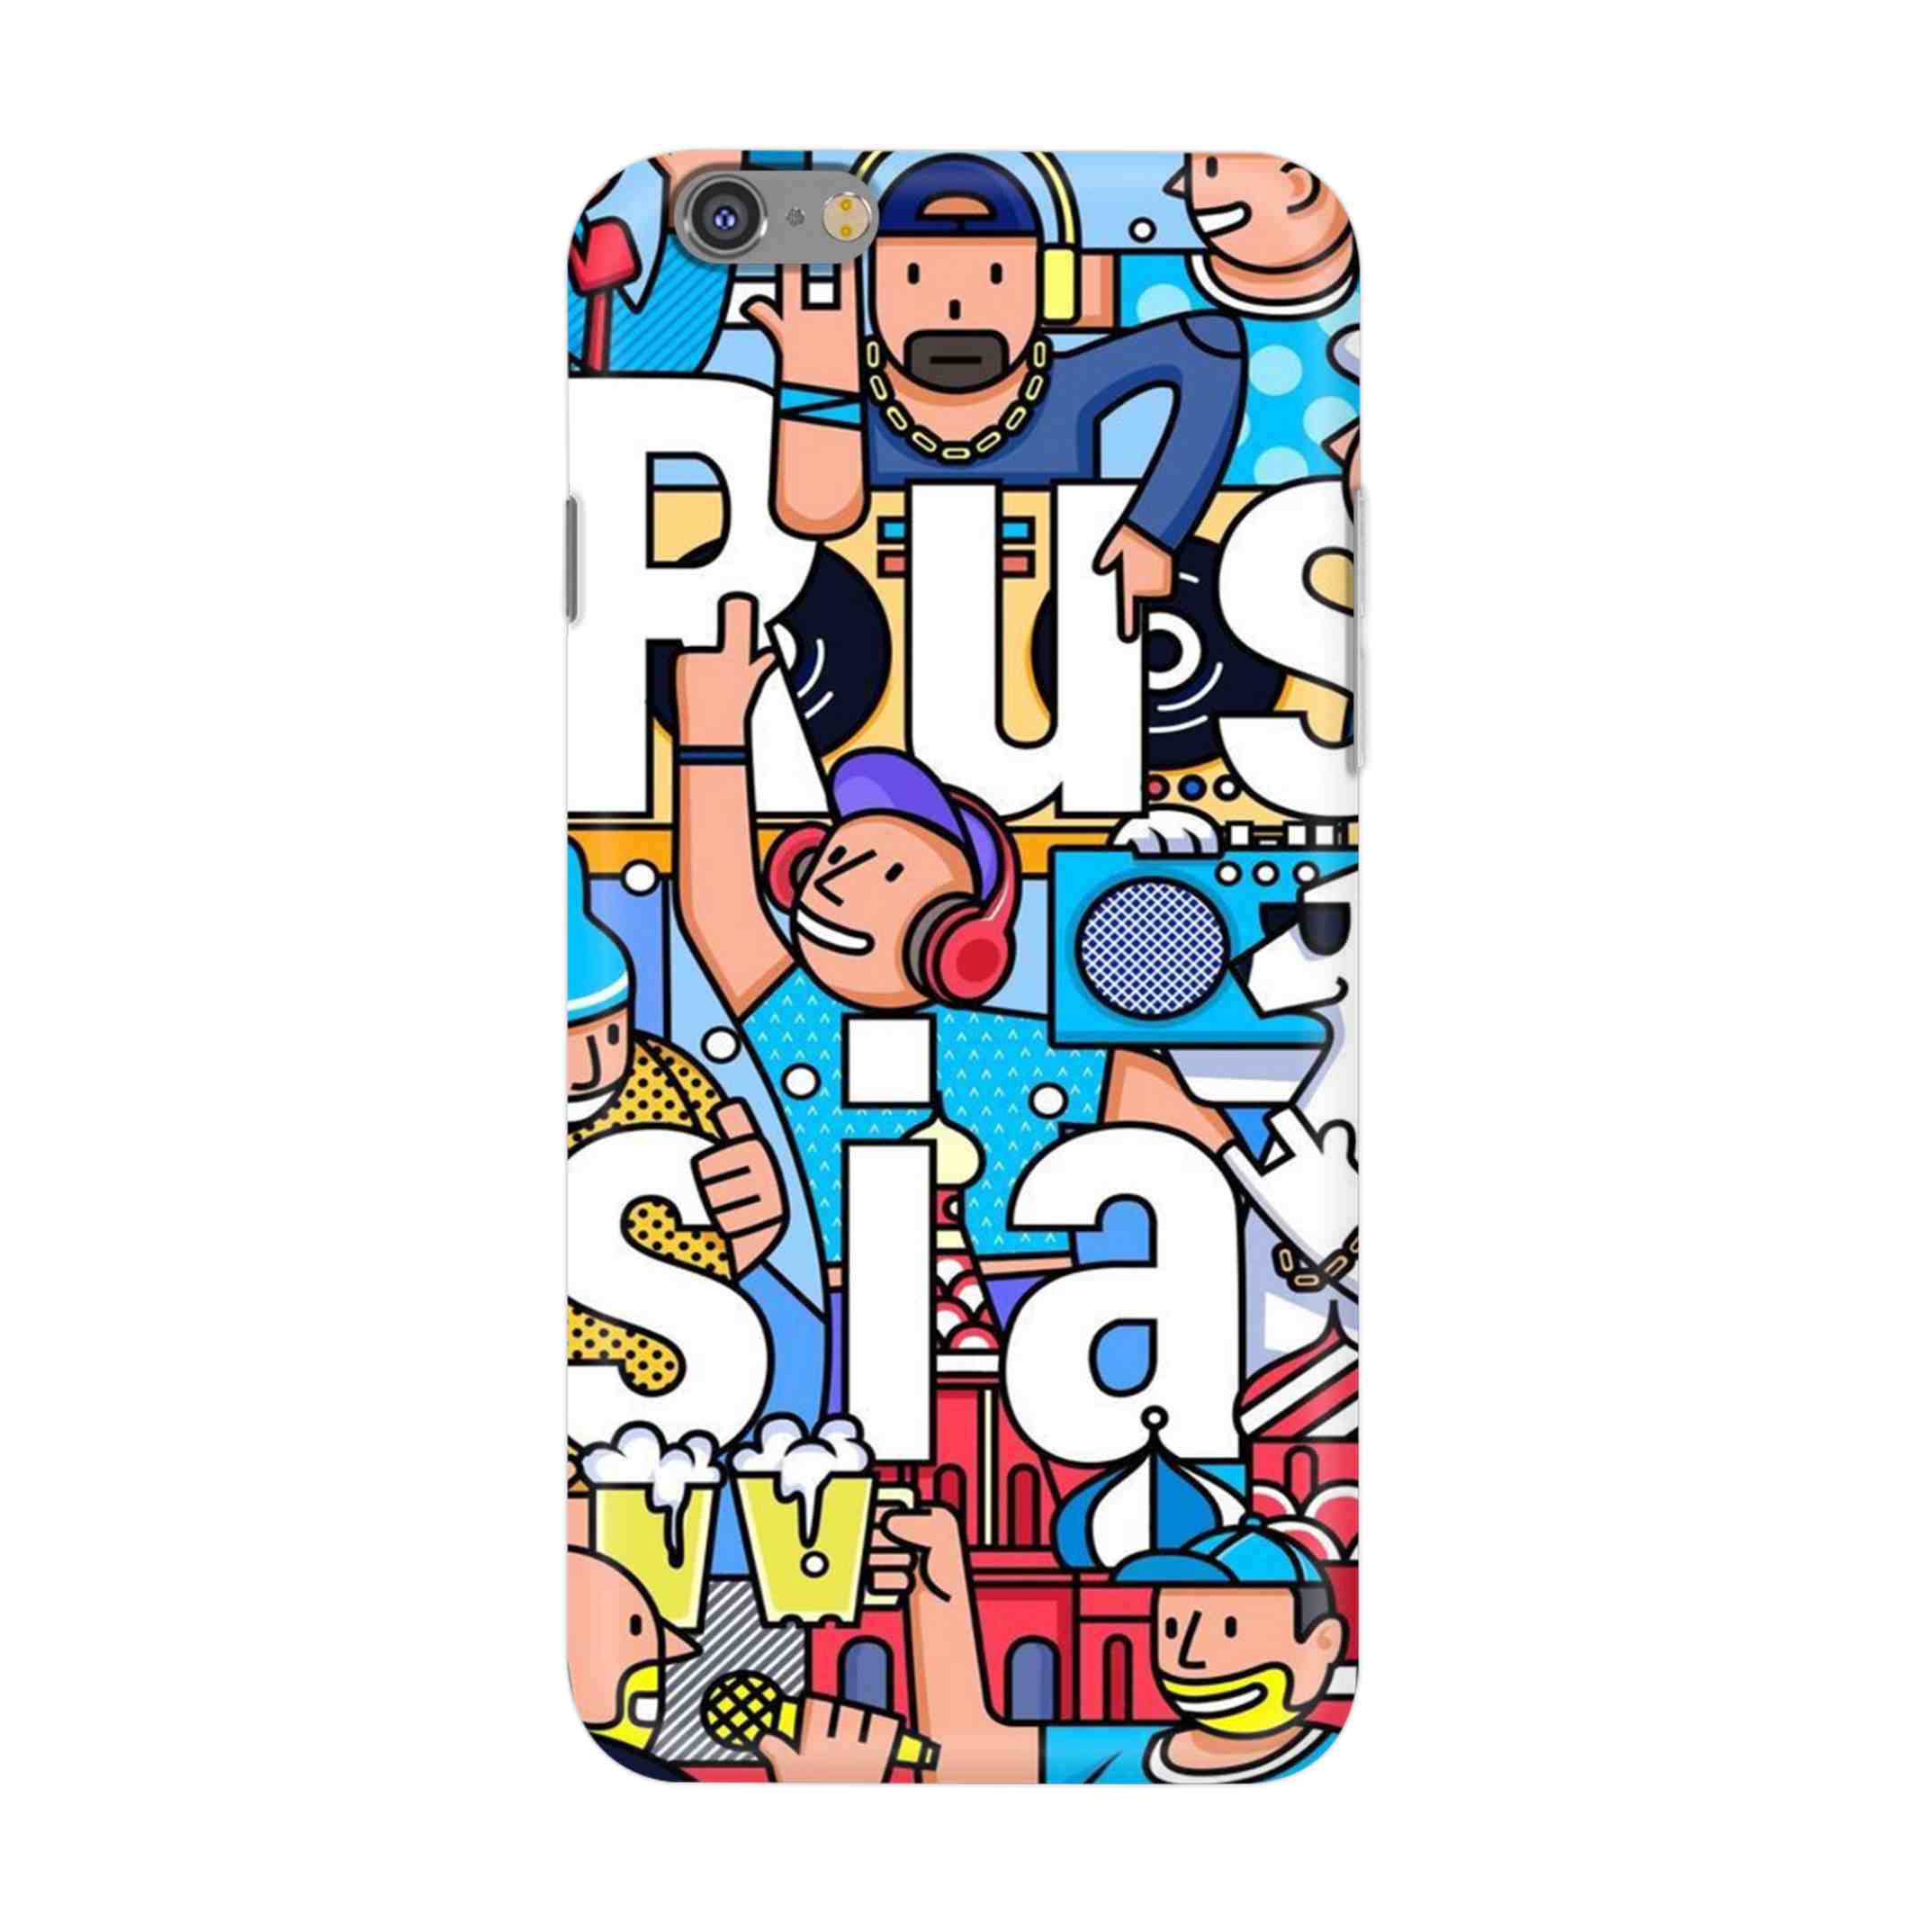 Buy Russia Hard Back Mobile Phone Case/Cover For iPhone 6 Plus / 6s Plus Online